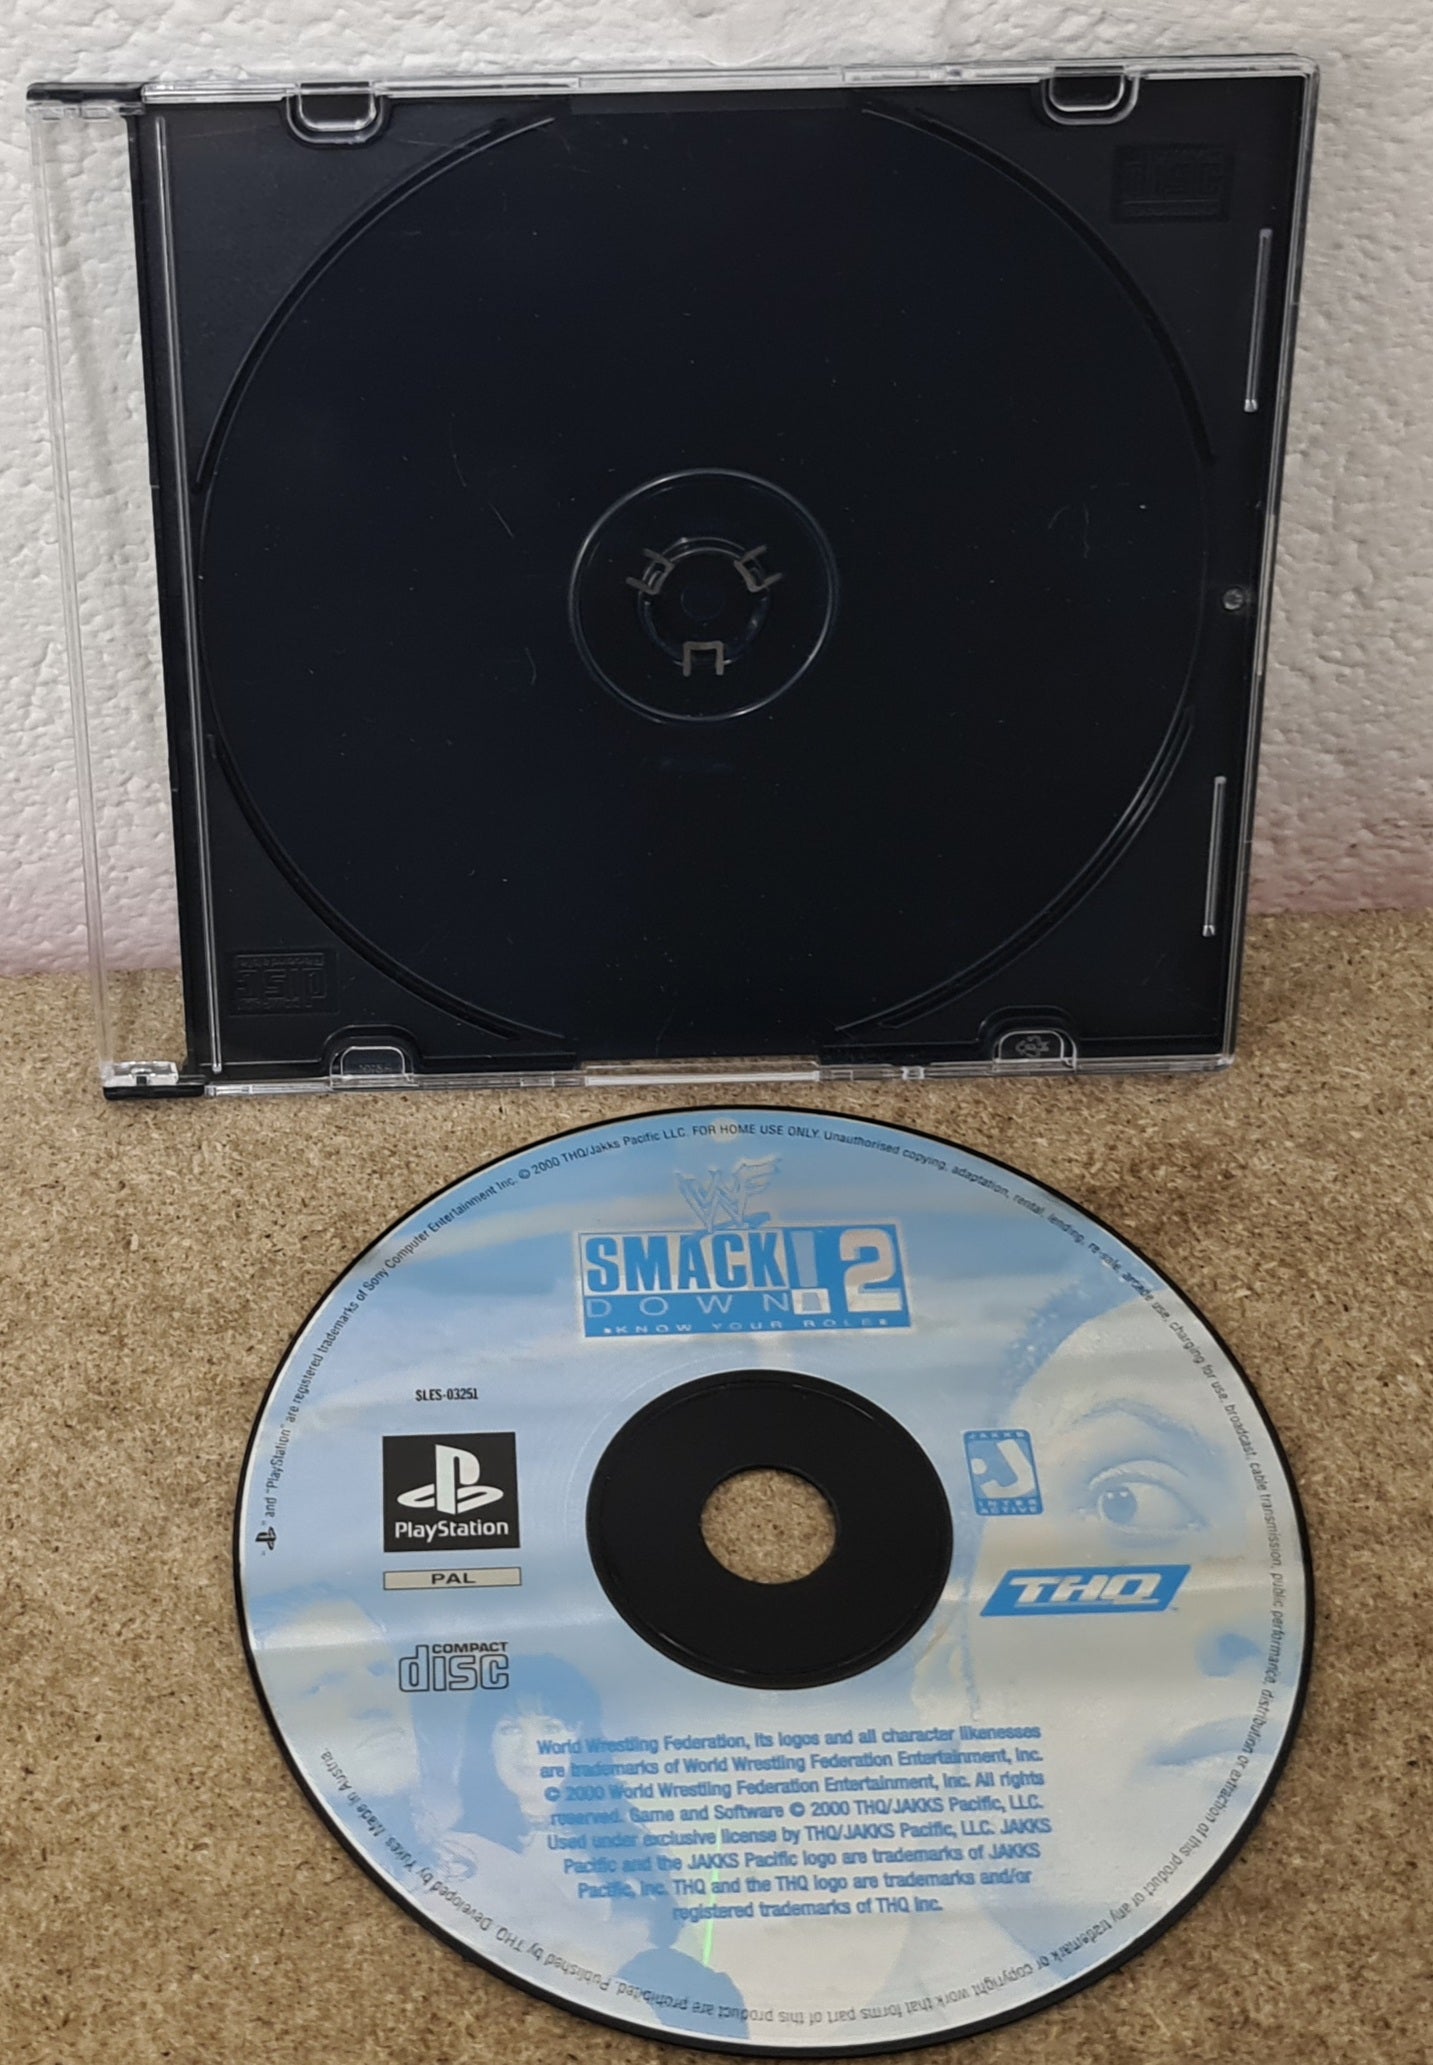 WWF Smackdown 2 Know Your Role Sony Playstation 1 (PS1) Game Disc Only